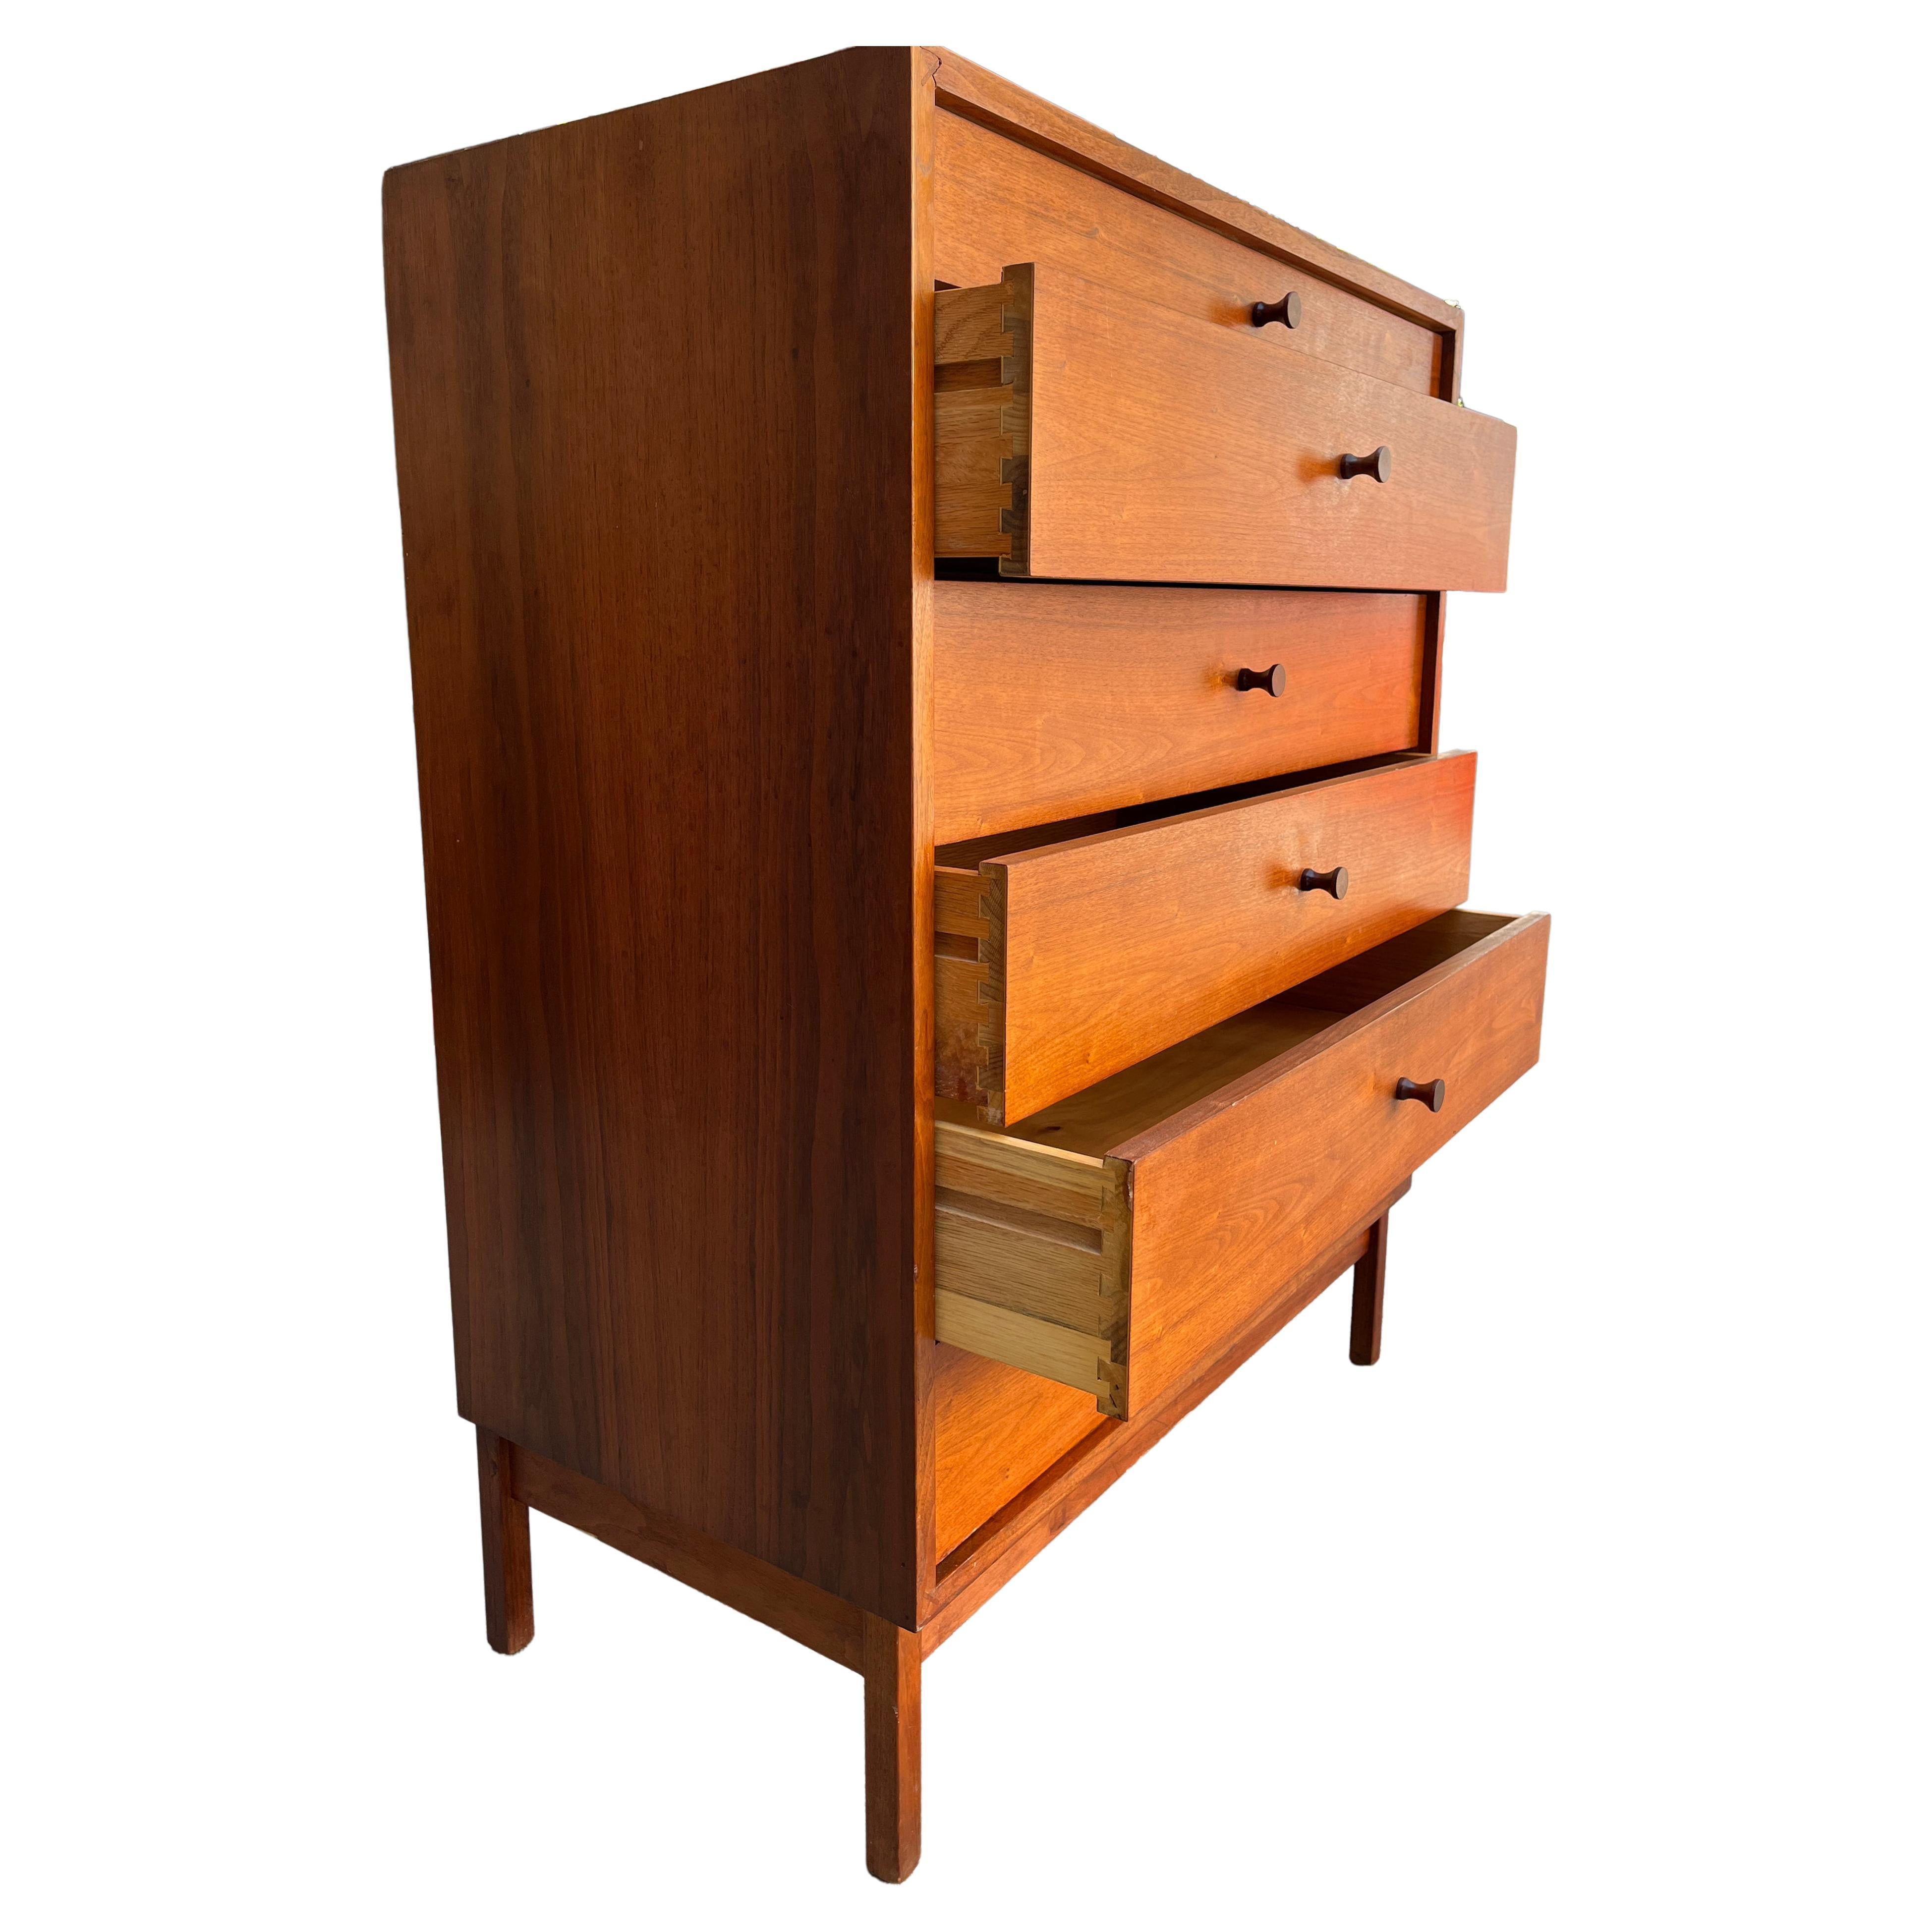 Mid-century American Studio crafted Richard Artschwager walnut 6 drawer dresser or chest of drawers. Good vintage condition with solid walnut round tapered knobs. Clean inside and out. Artschwager started his career designing and making furniture in